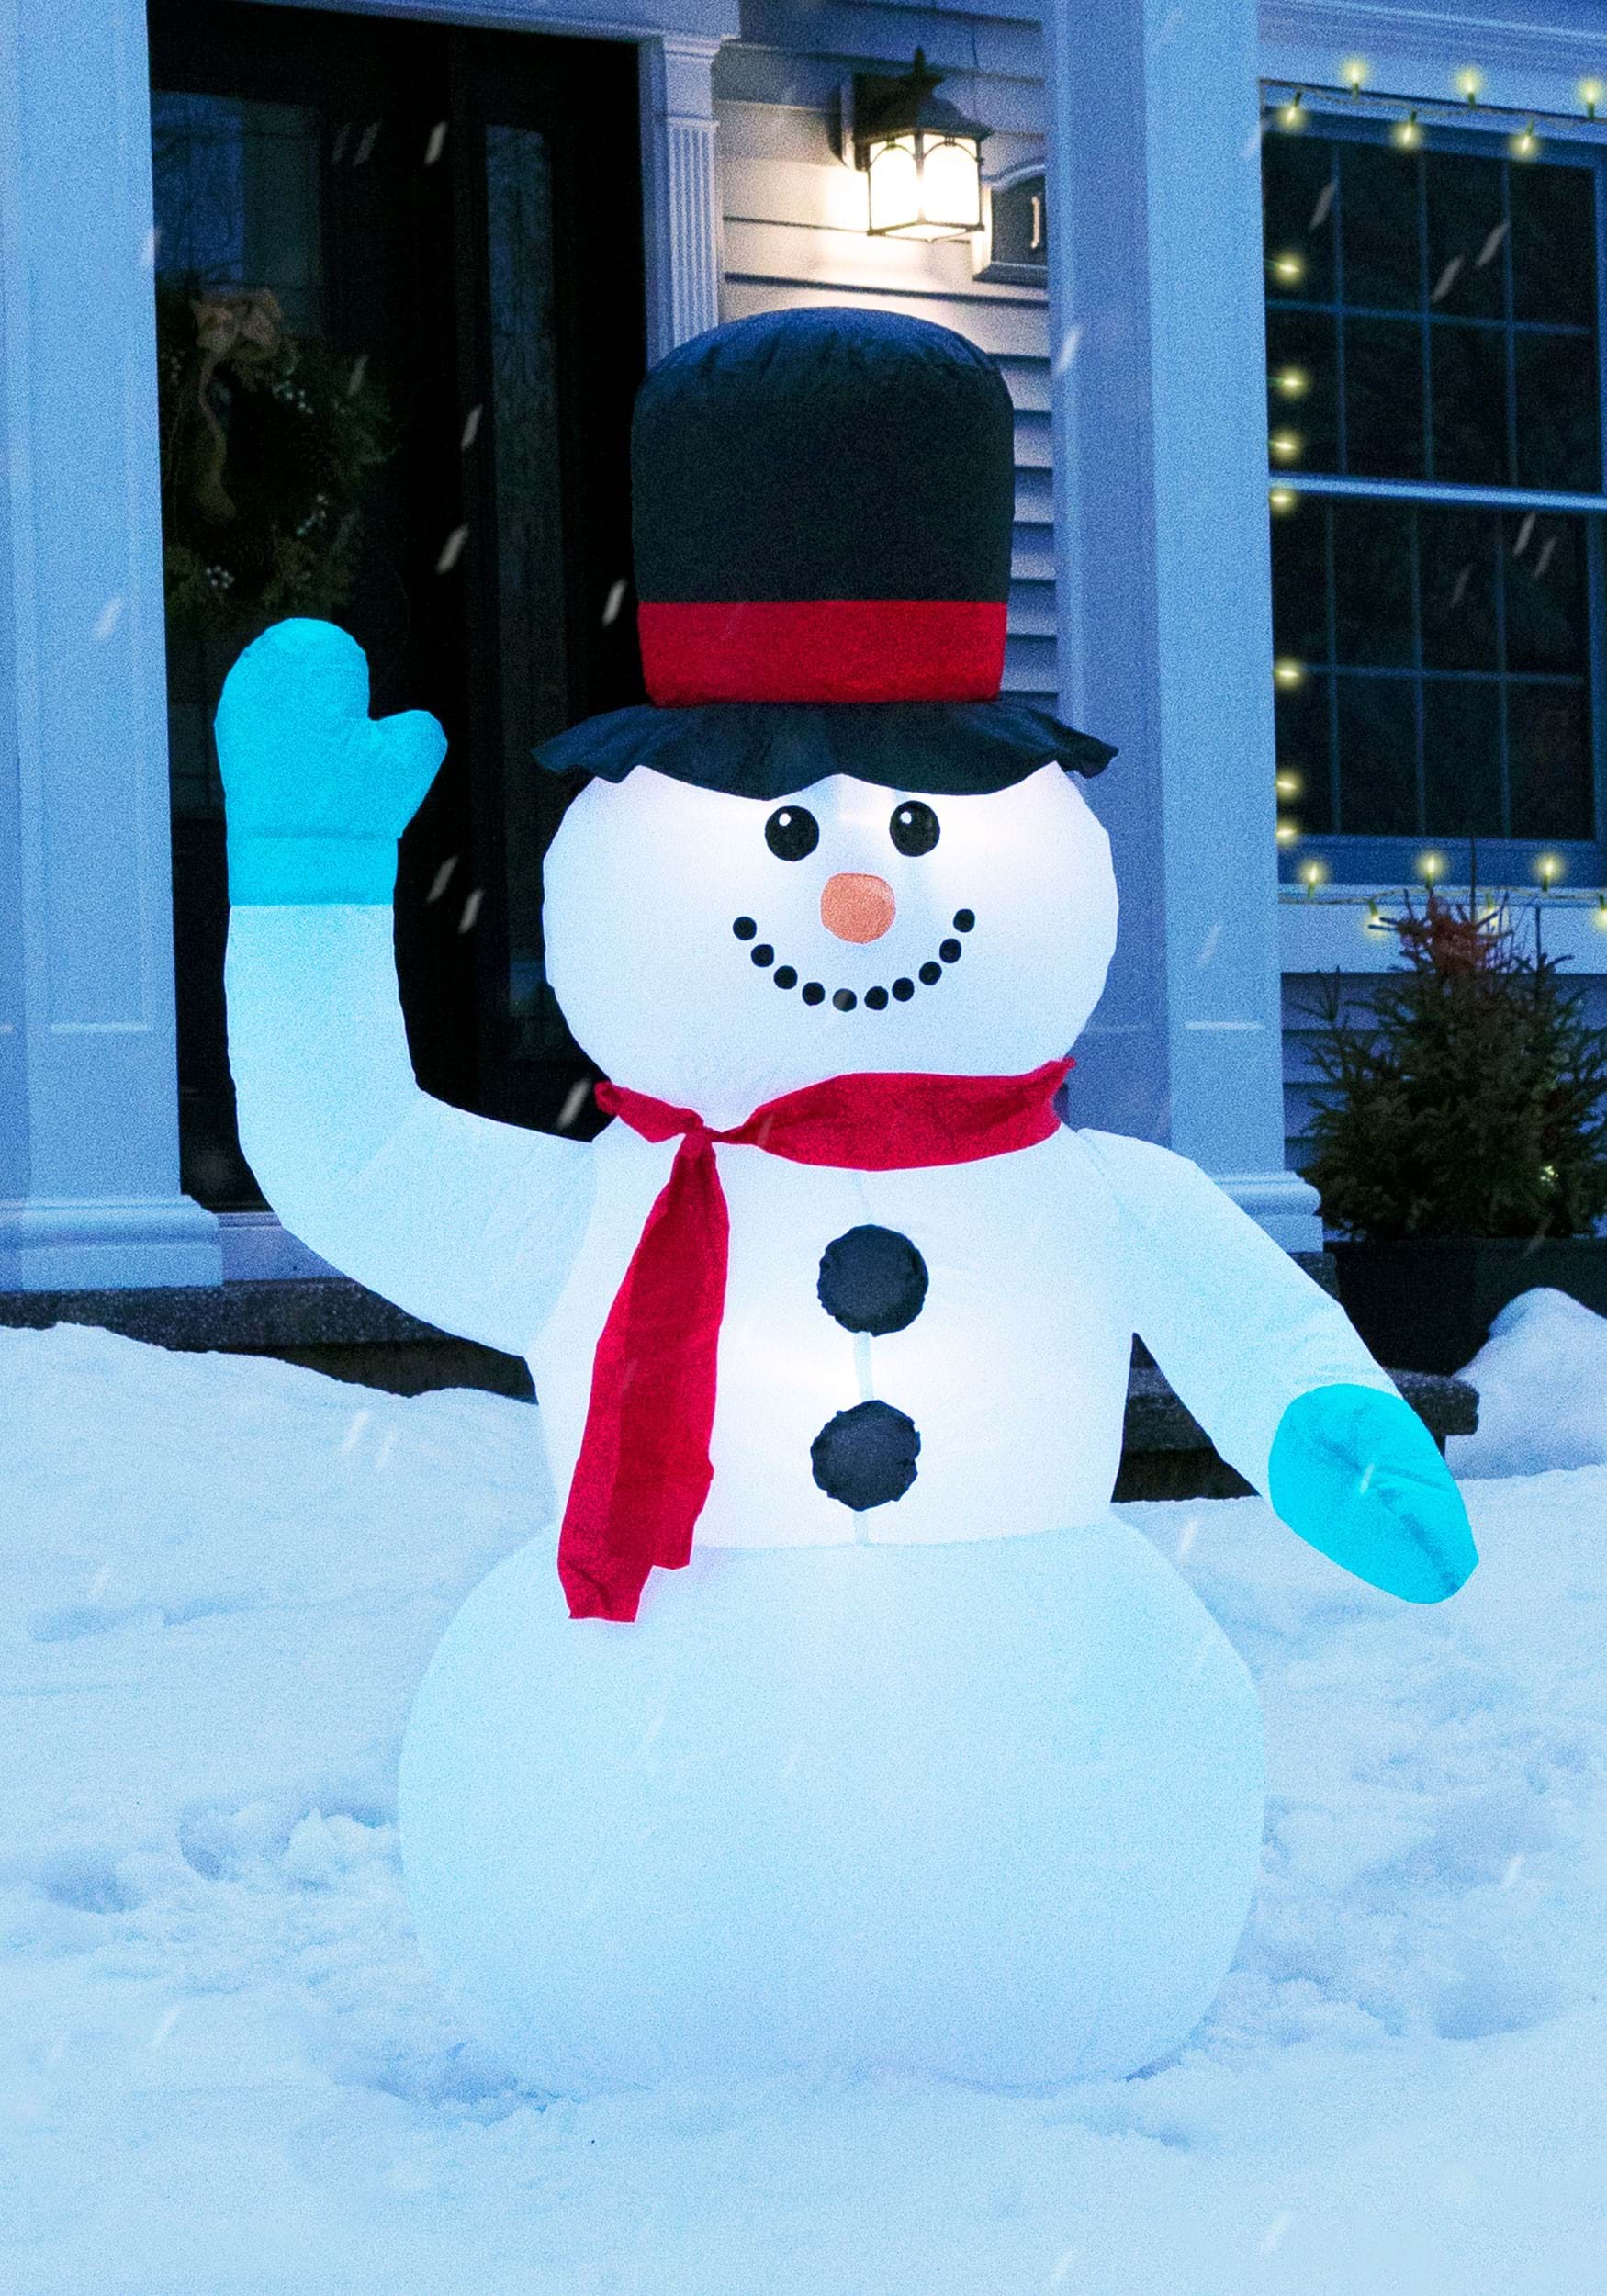 4 Foot Inflatable Snowman Christmas Decoration